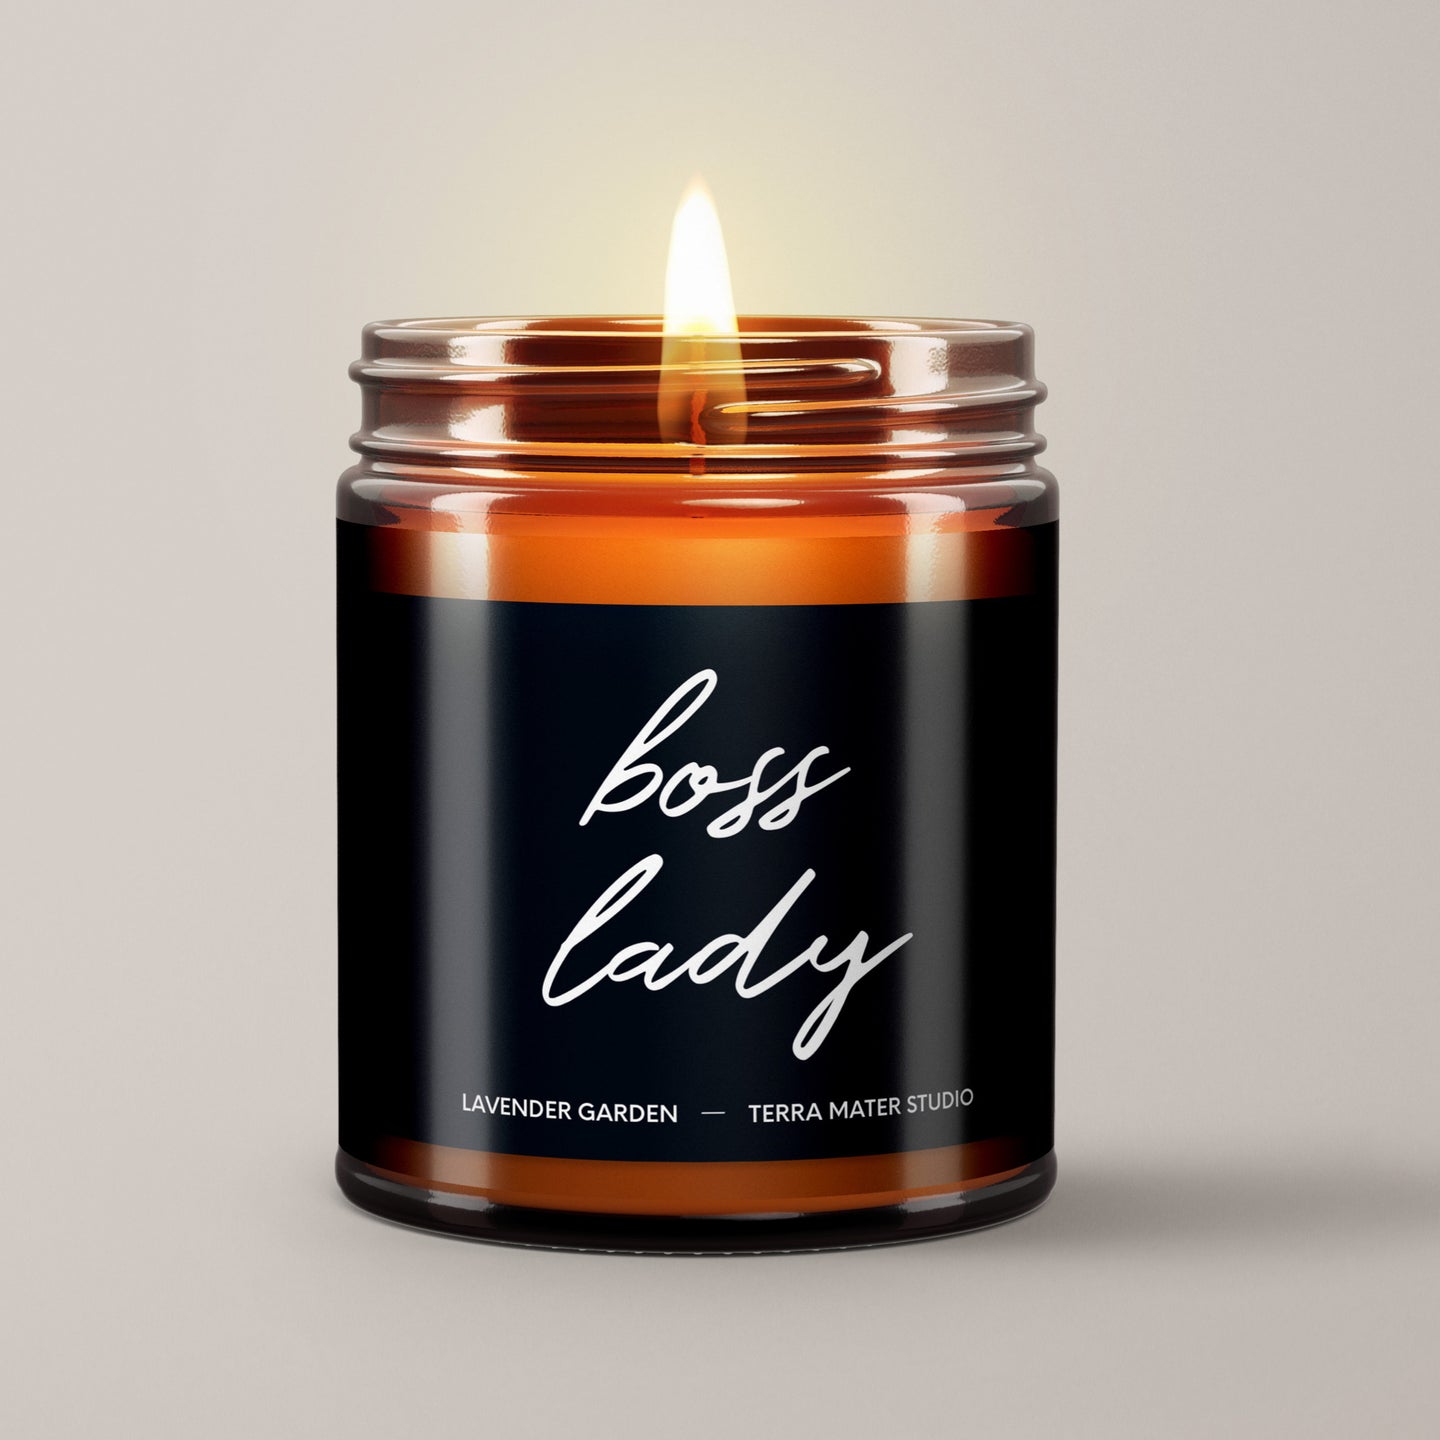 Boss Lady Soy Wax Candle